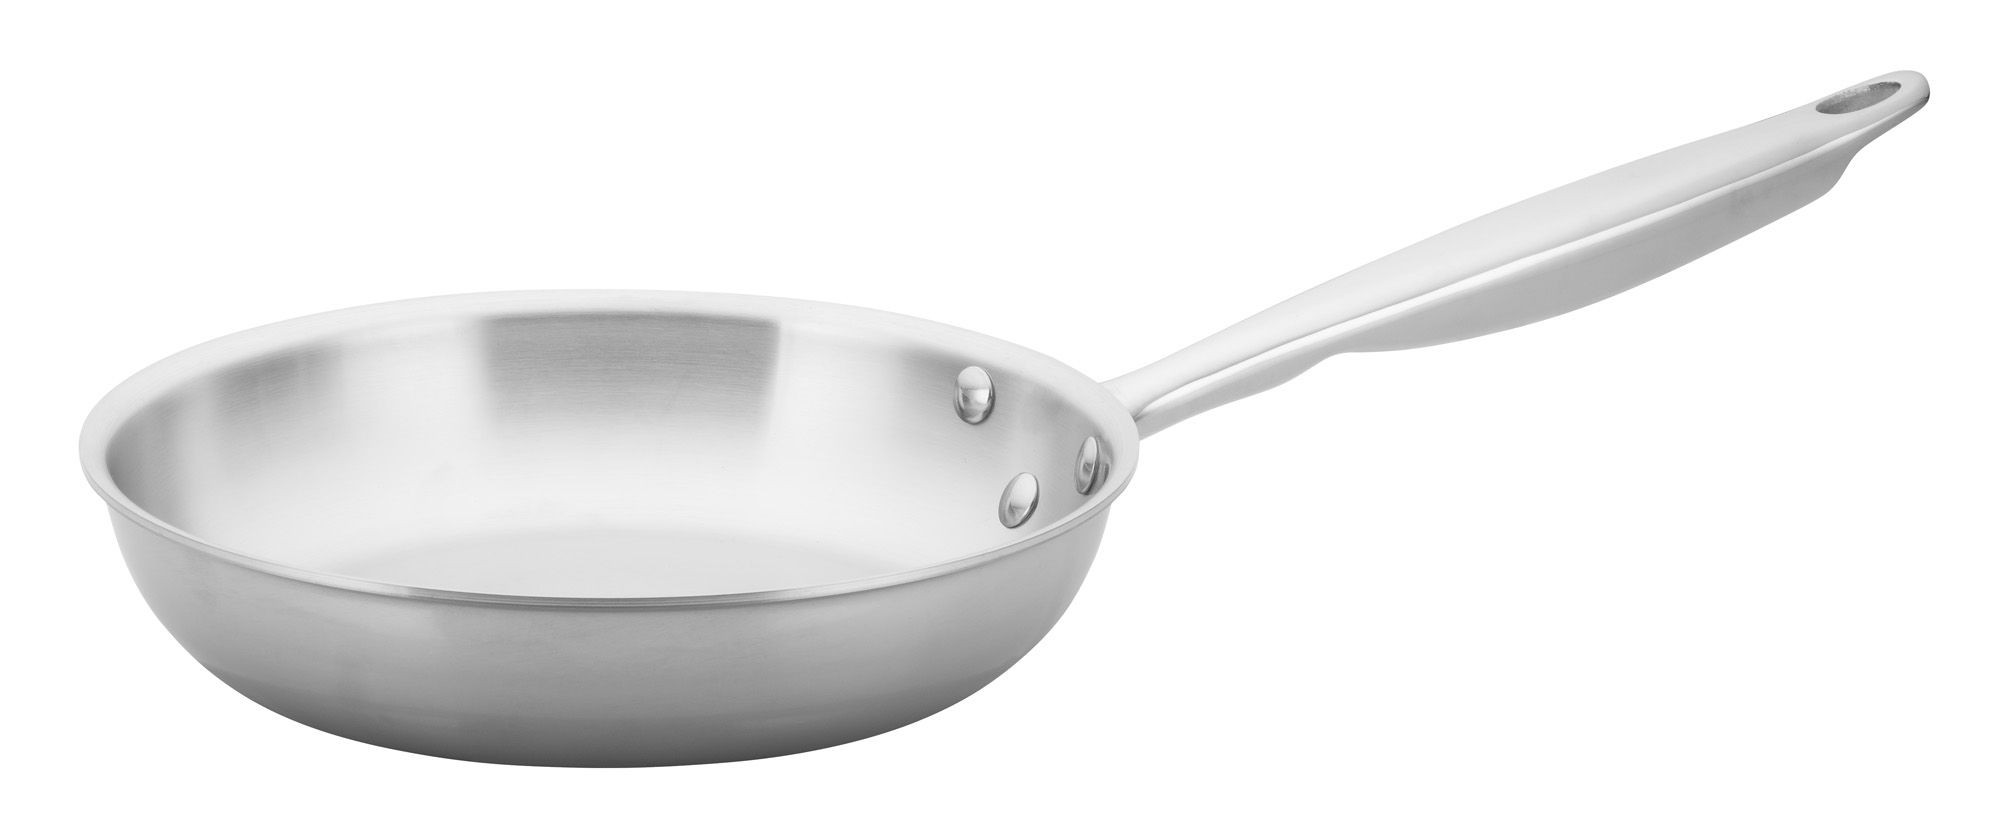 Winco TGFP-8 Tri-Ply Stainless Steel Natural Finish 8" Fry Pan